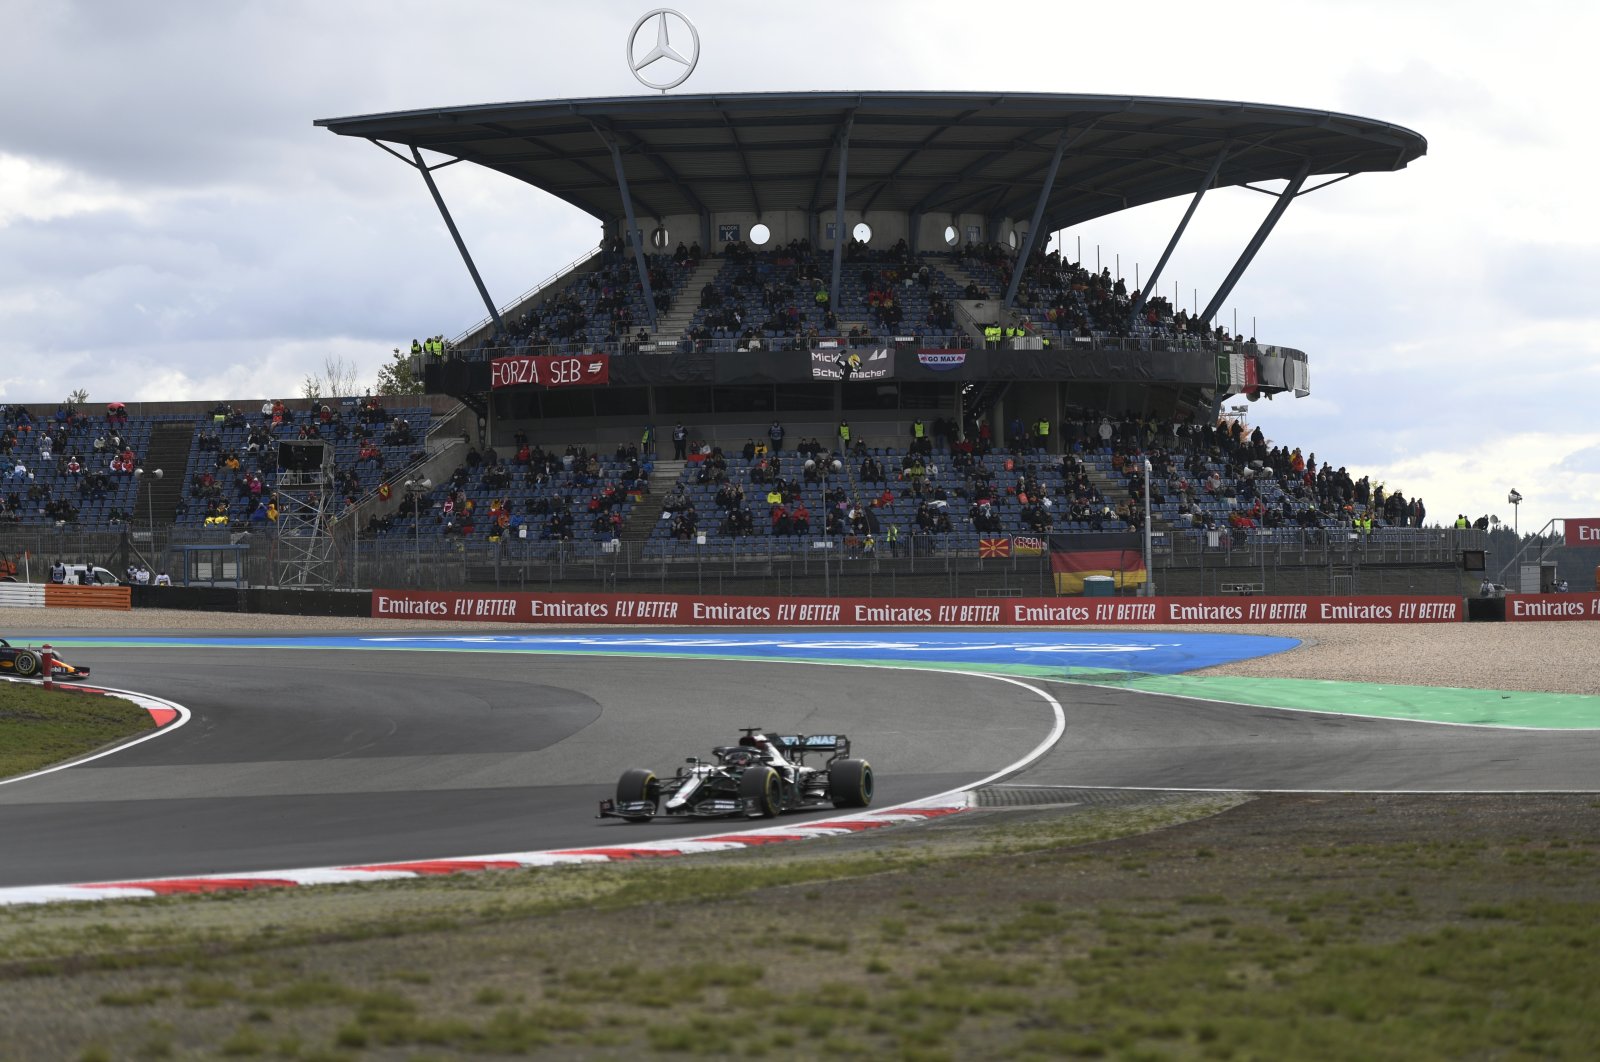 Mercedes driver Lewis Hamilton steers his car to win the Eifel Formula One Grand Prix at the Nurburgring racetrack in Nurburg, Germany, Oct. 11, 2020. (AP Photo)